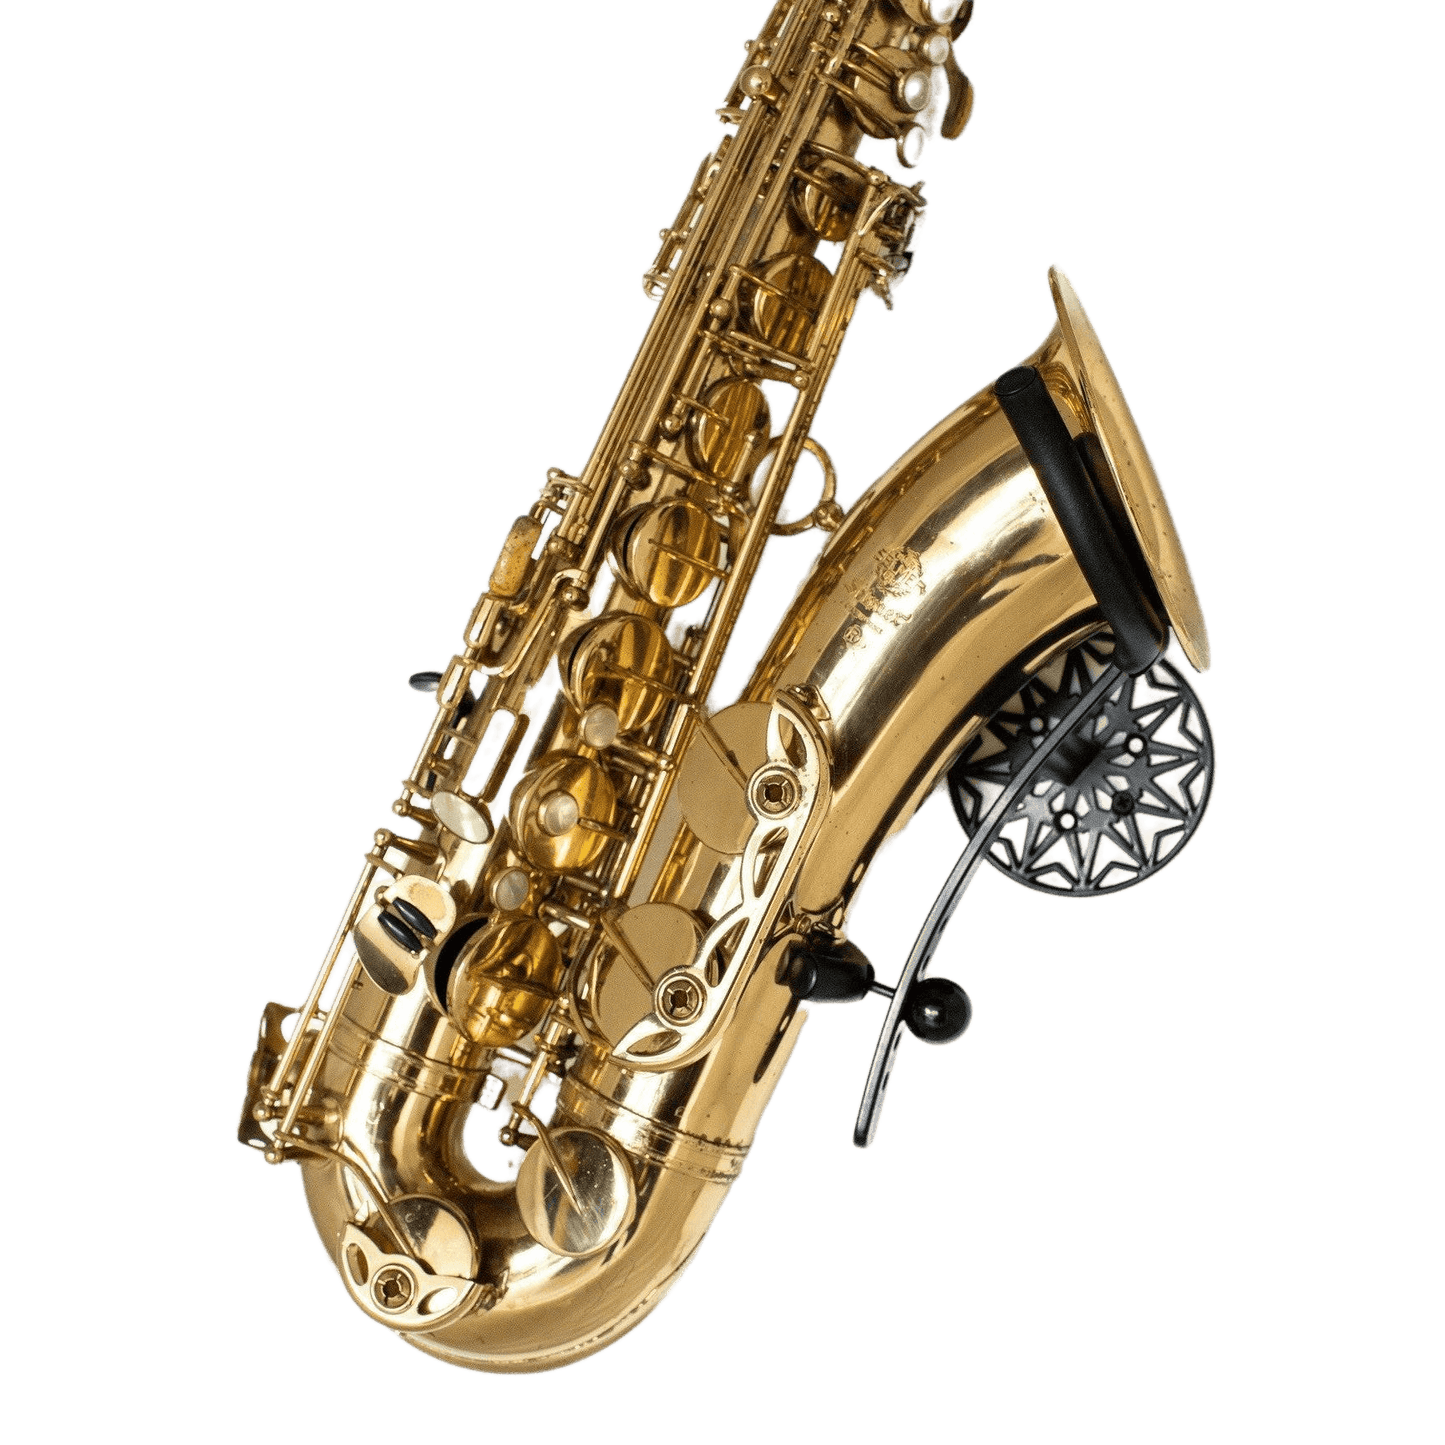 gold finished selmer tenor saxophone in wal-mounted stand Samba by Locoparasaxo